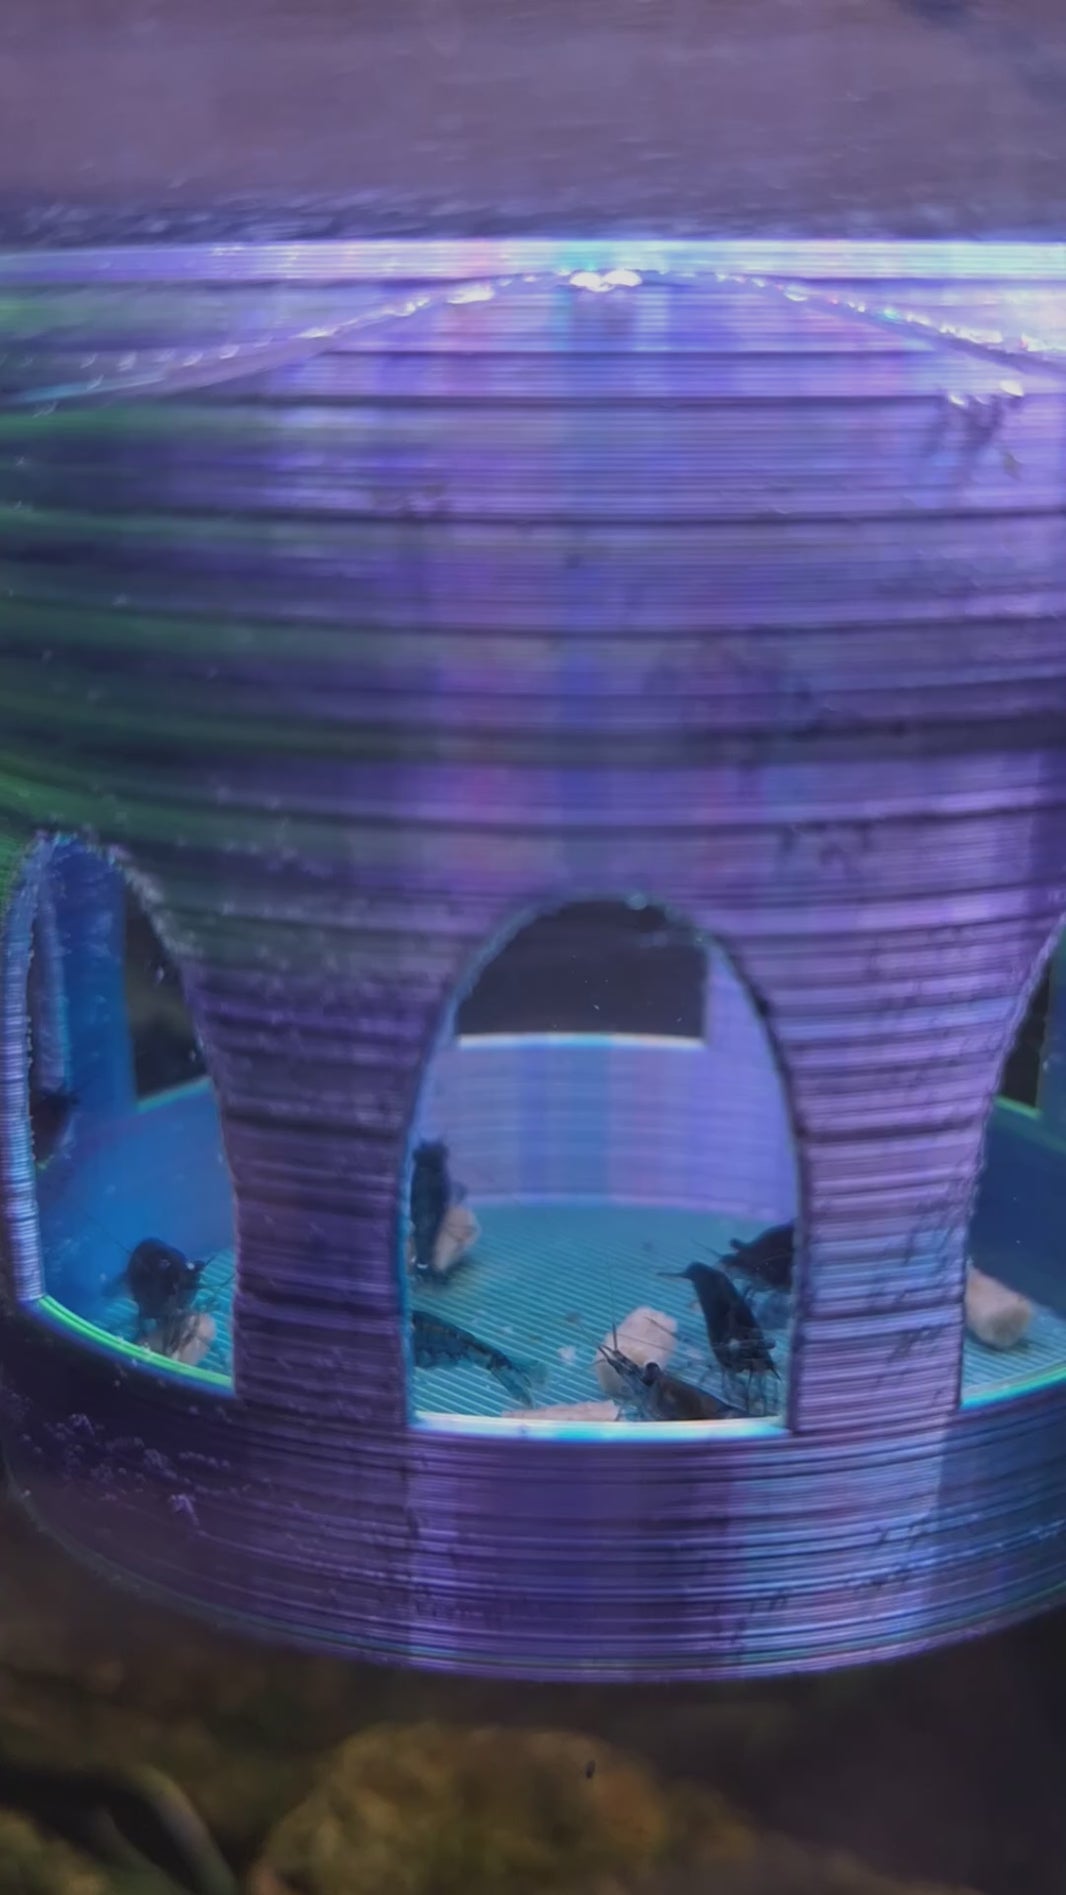 Watch the mesmerizing Floating Shrimp Gazebo Feeder, crafted from Aceaddity's tri-color silk PLA, as it gently bobs in an Aquatop 6g bookshelf tank. In this tranquil underwater scene, blue, yellow, and purple hues blend as hungry Blue Dream neocaridina shrimp flock to feast on 'Shrimpee' by Xtreme Aquatic Foods. This must-have item for shrimp enthusiasts showcases both form and function, enhancing the beauty and health of your miniature aquatic world.